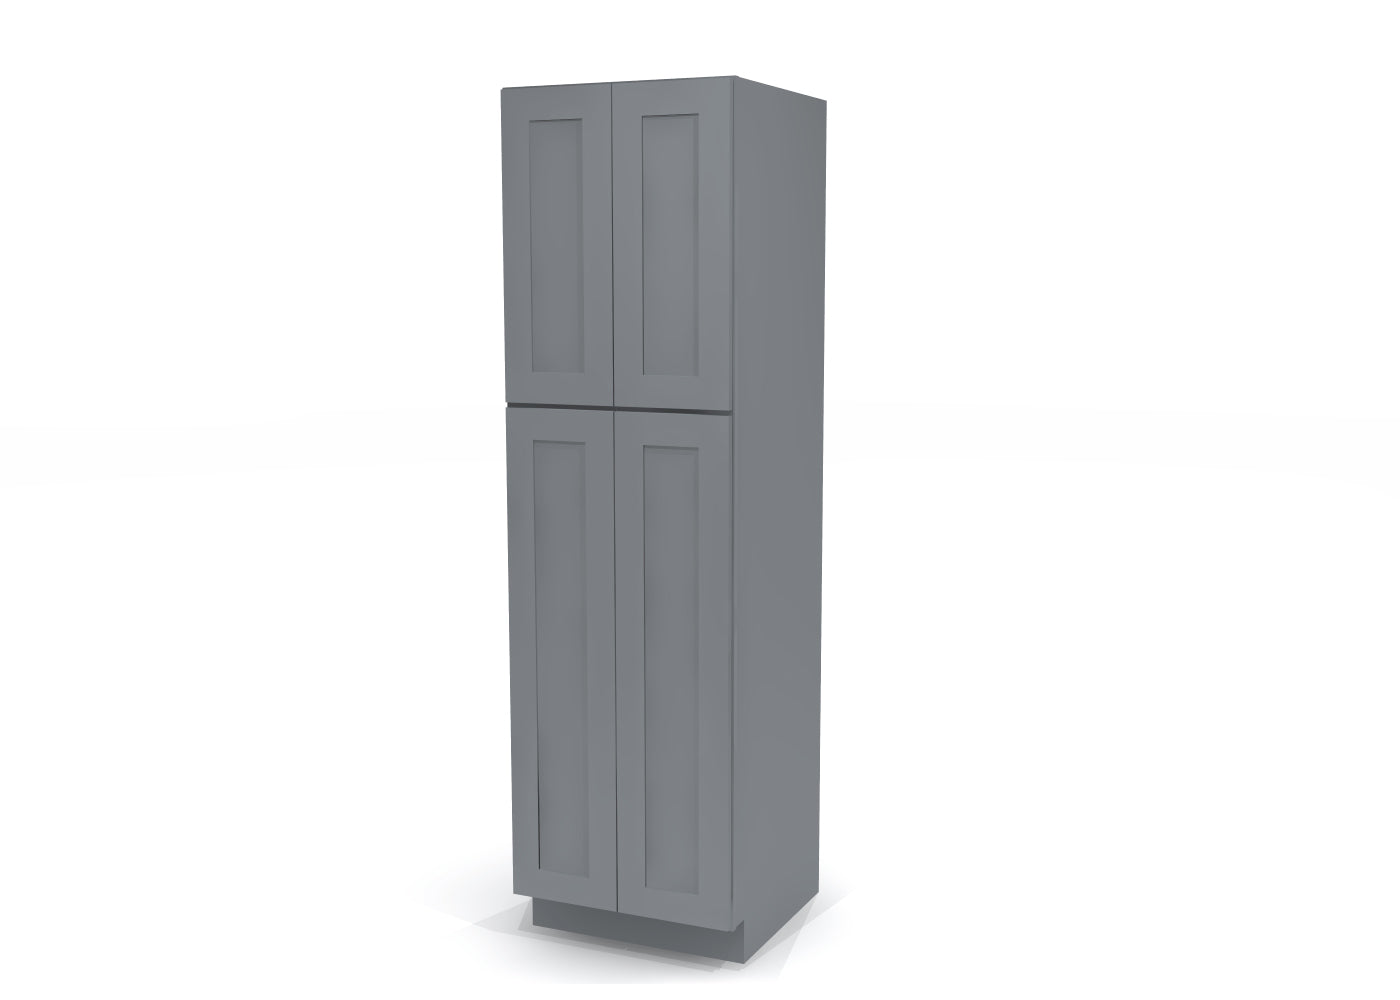 Utility Pantry Double Door 84" by 24" Wide Gray Shaker Cabinet